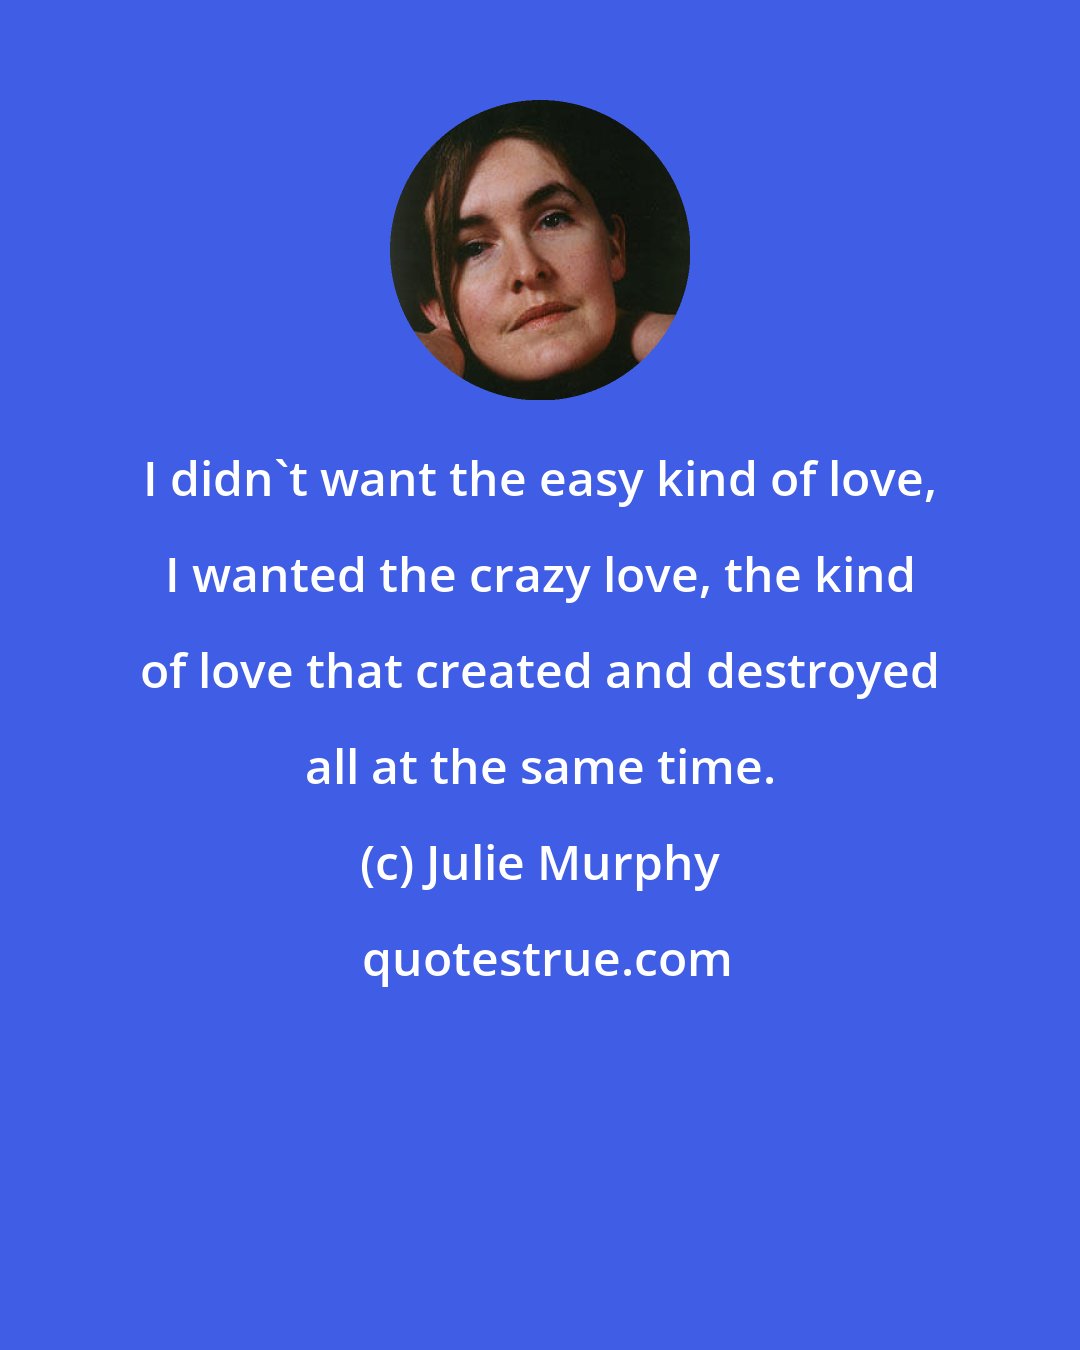 Julie Murphy: I didn't want the easy kind of love, I wanted the crazy love, the kind of love that created and destroyed all at the same time.